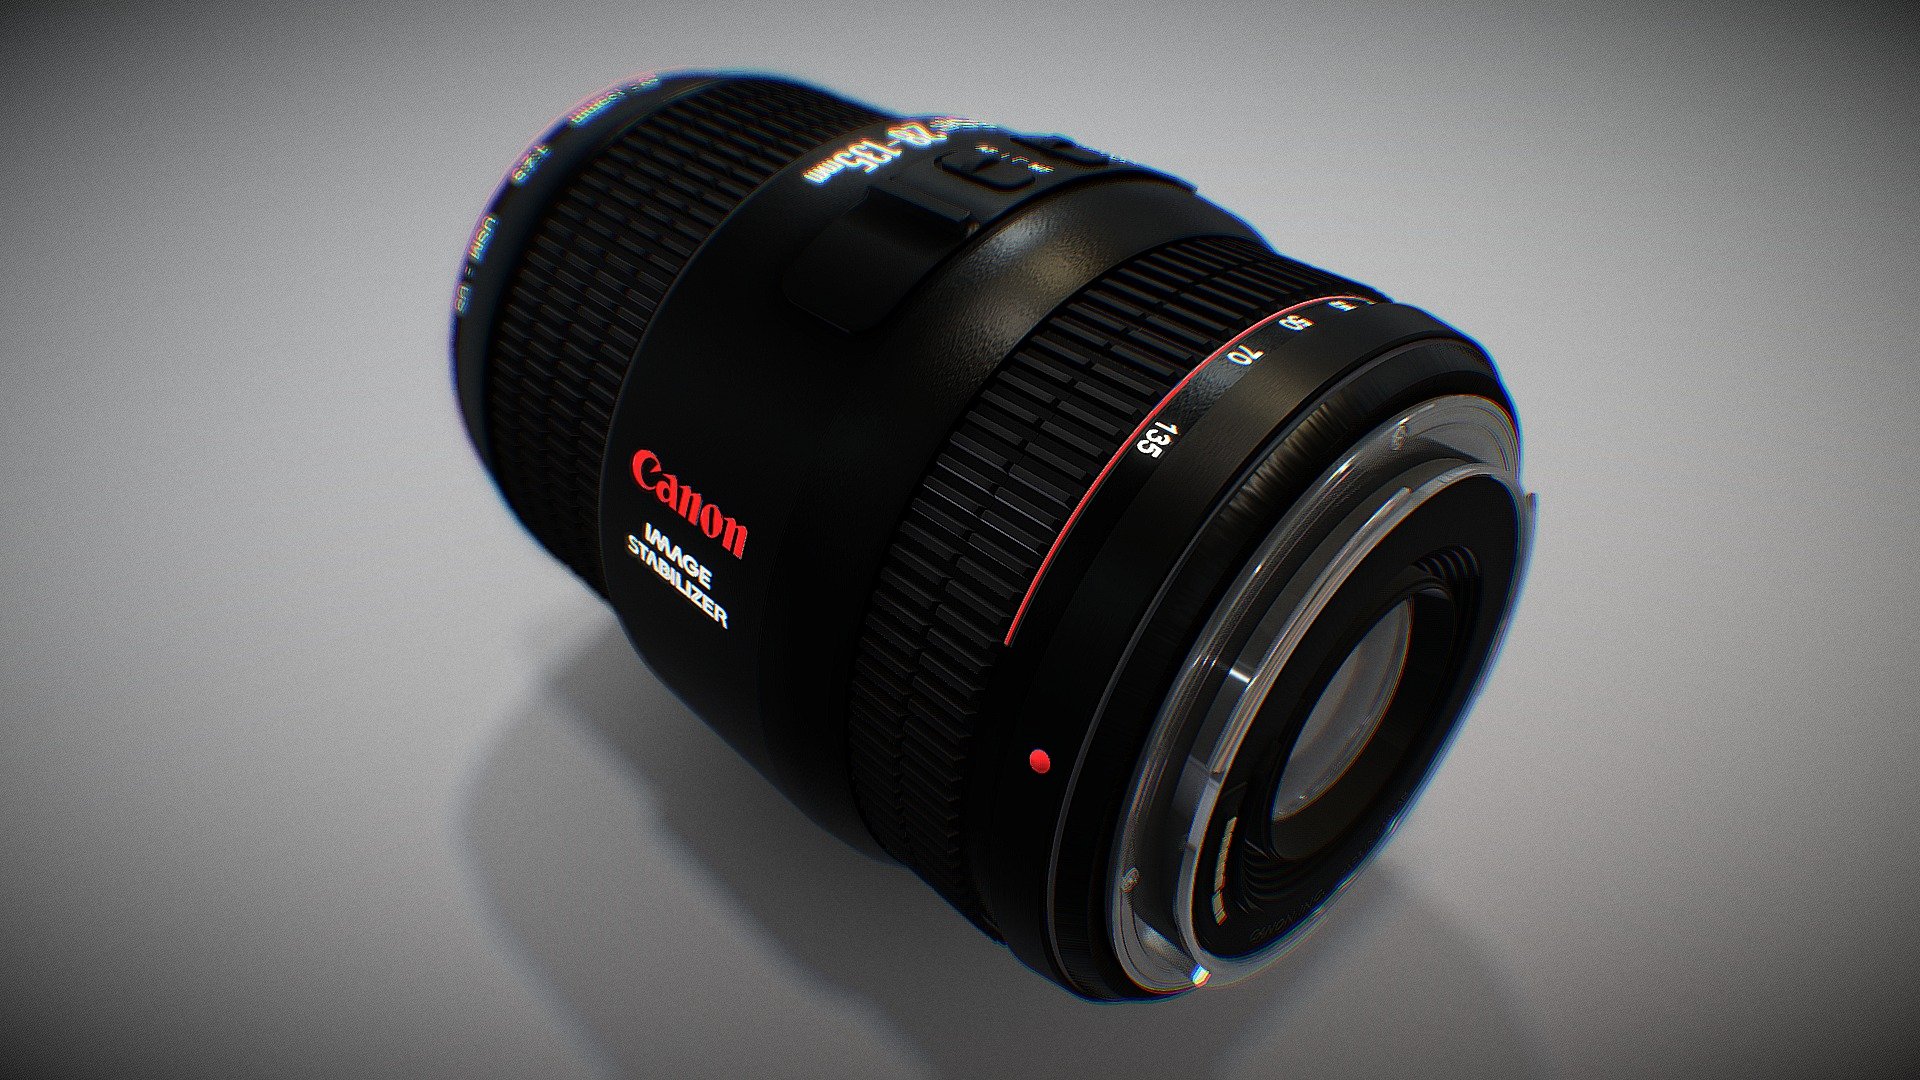 Modeled this over the Weekend, Feb -2022.  This is my own model of the Canon lens I used in the past 3d model